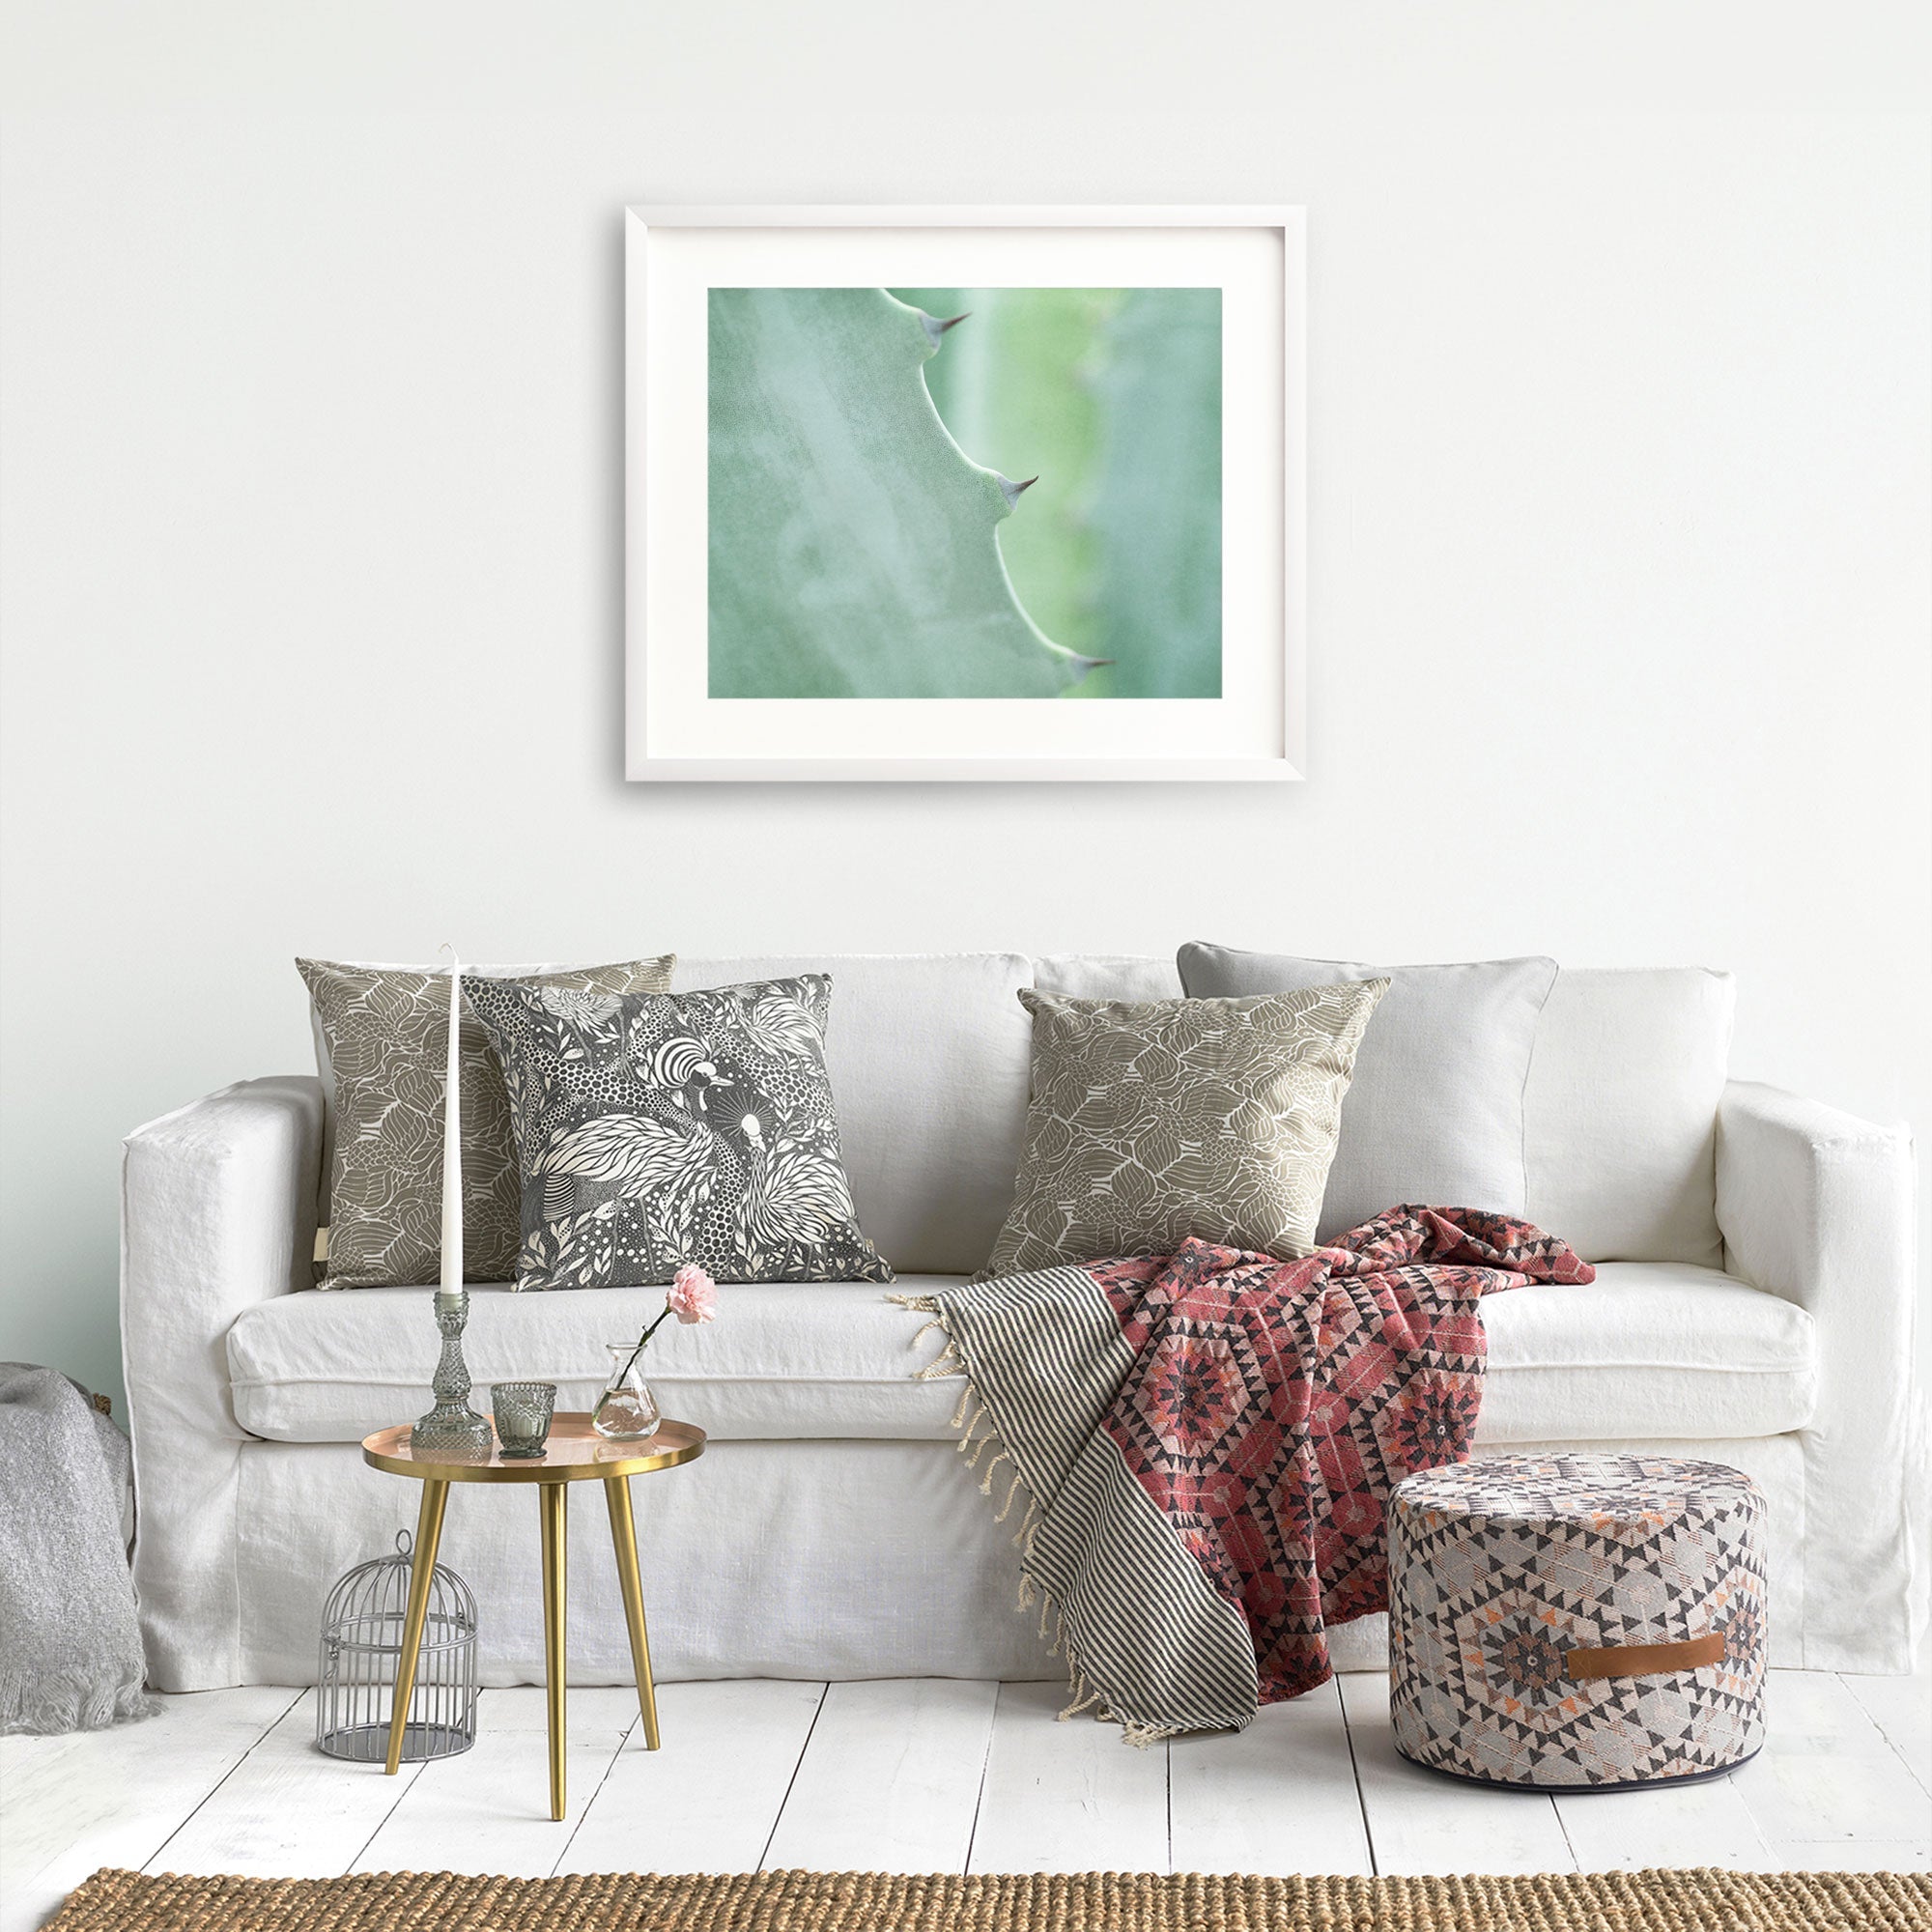 A cozy living room scene with a white couch adorned with patterned pillows, a red throw blanket, a small round table with a book and an Aloe Vera plant, a framed abstract art piece featuring the Mint Green Botanical Print &#39;Aloe Vera Spikes&#39; from Offley Green.